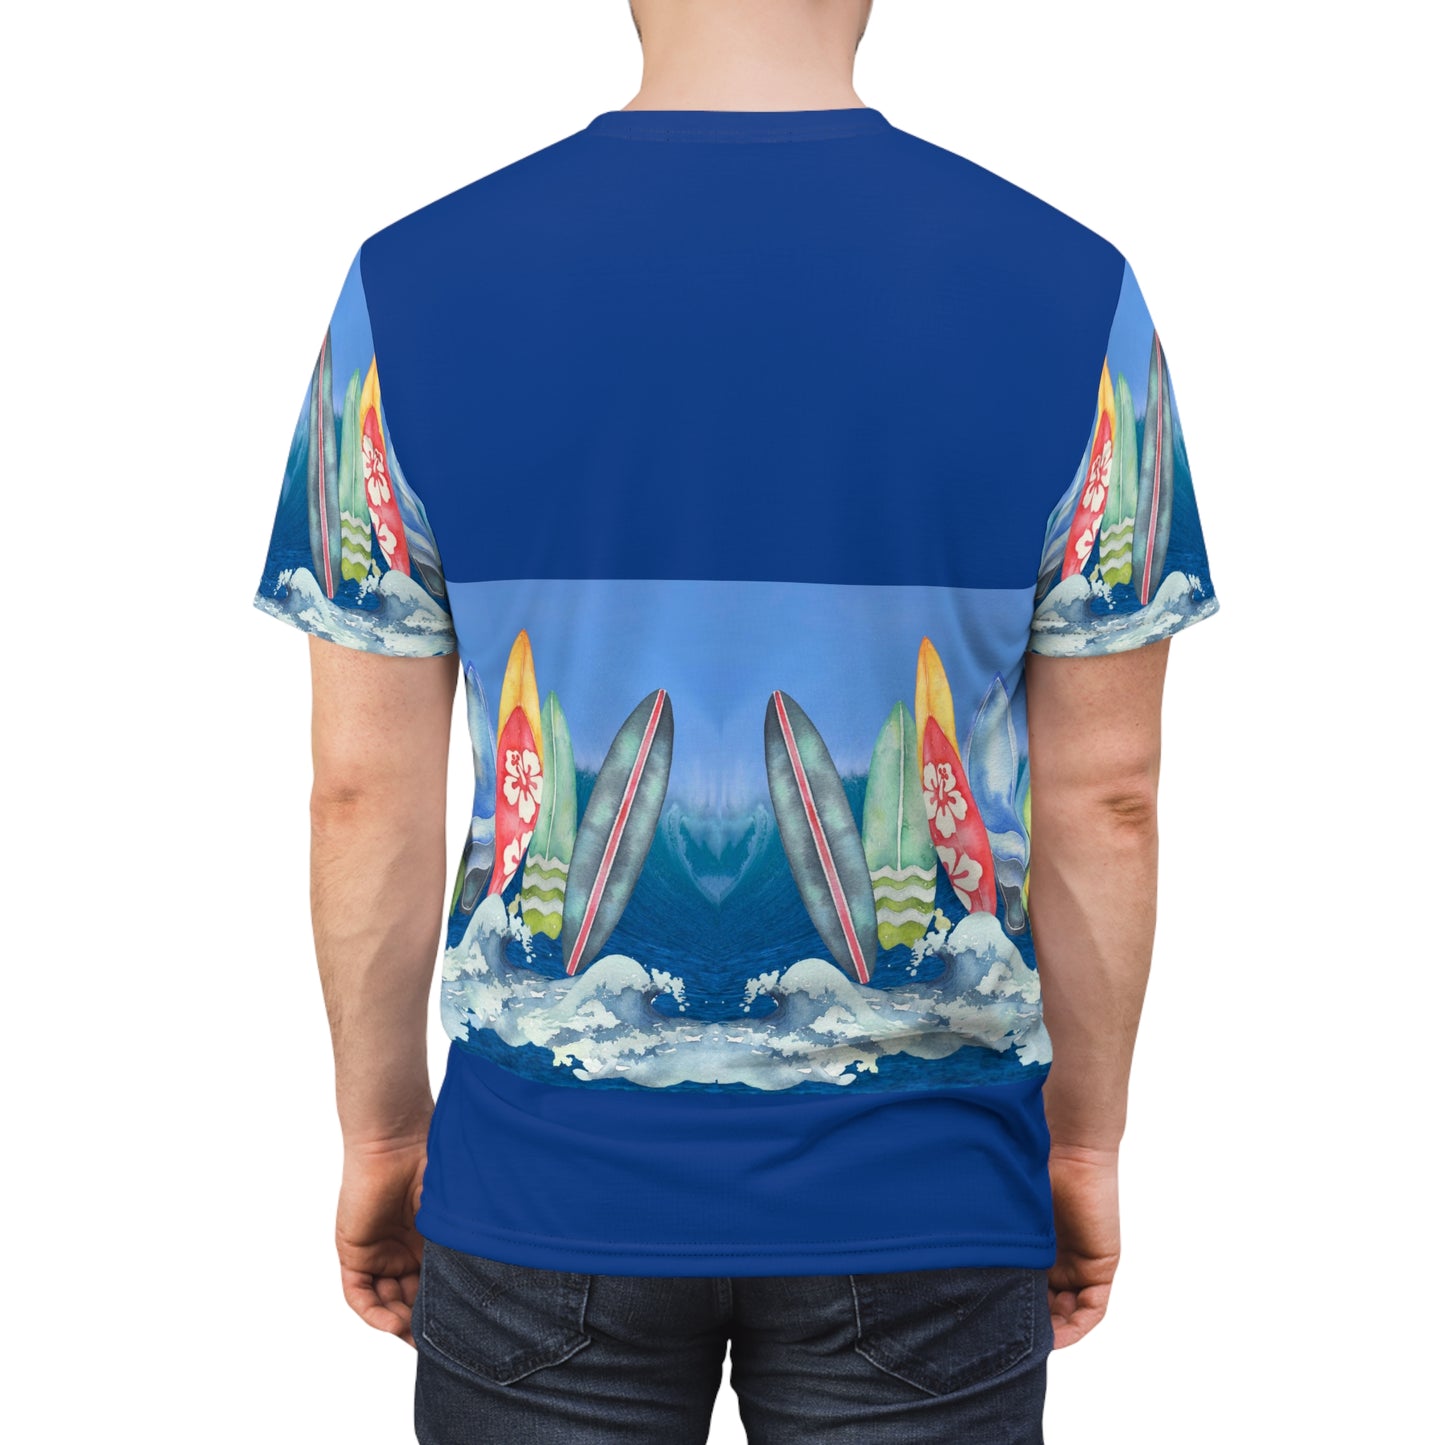 Surfing Boards - T-Shirt For You